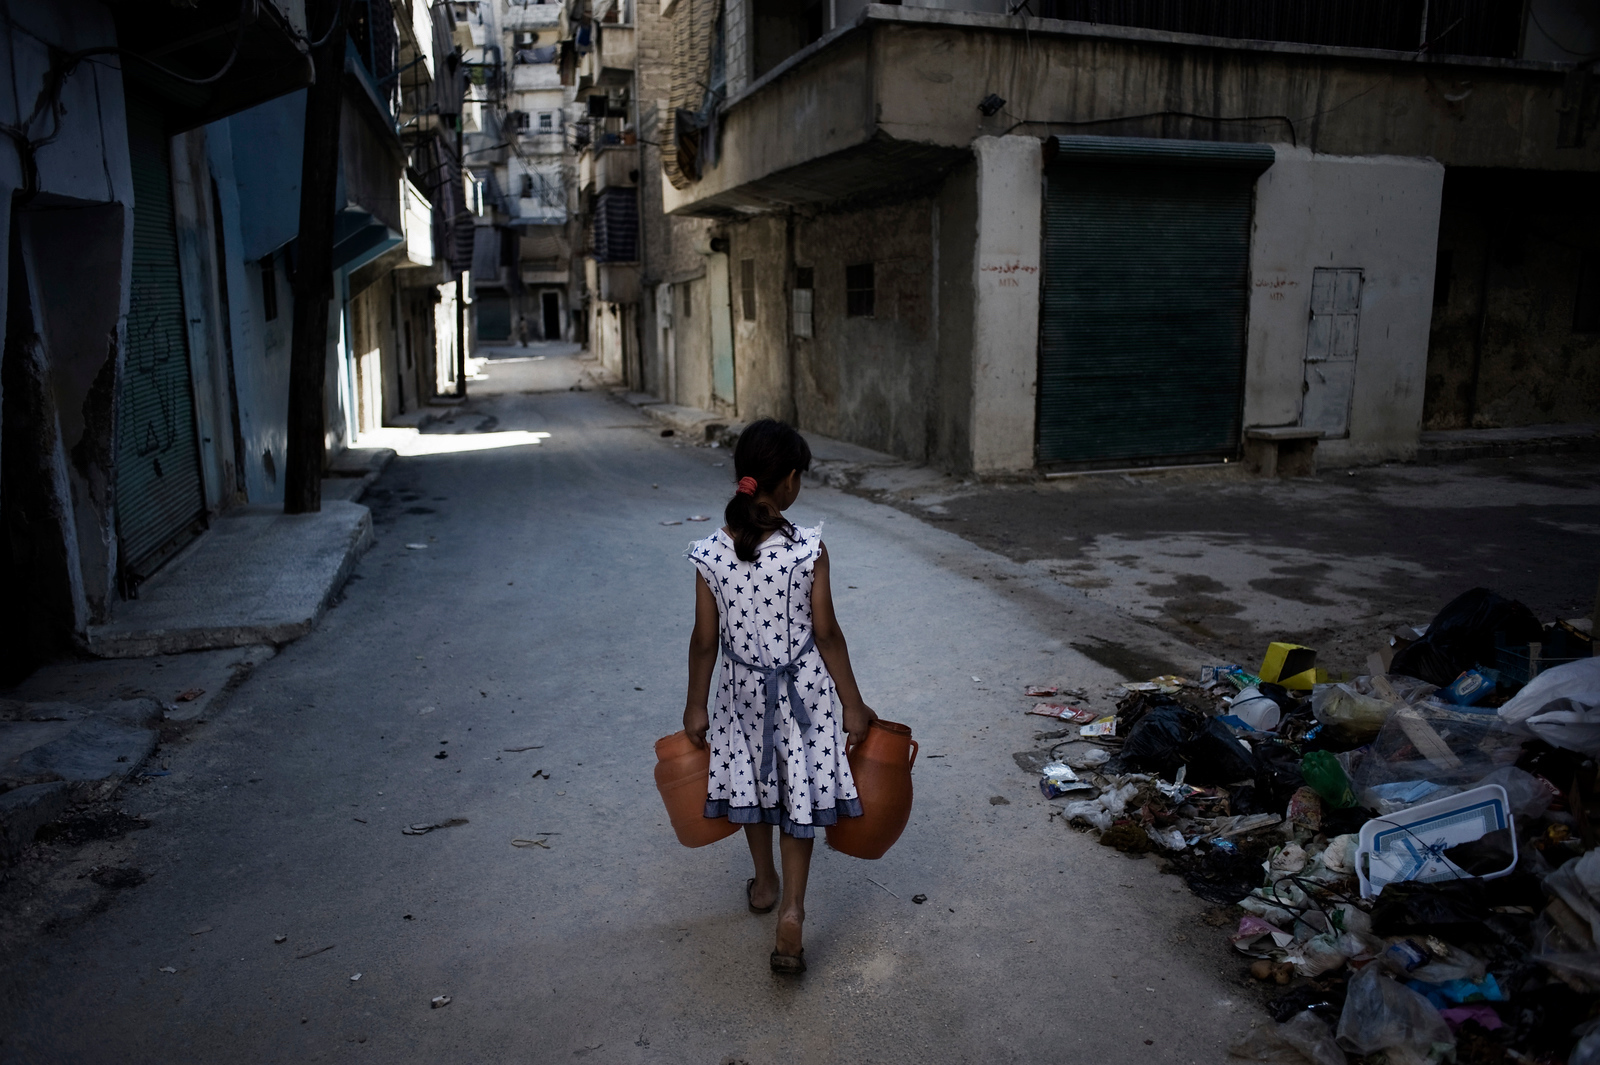 A girl carrying jerry cans of water walks past a pile of debris on a street in Aleppo in 2012. Access to water has only worsened as Syria’s war grinds on.